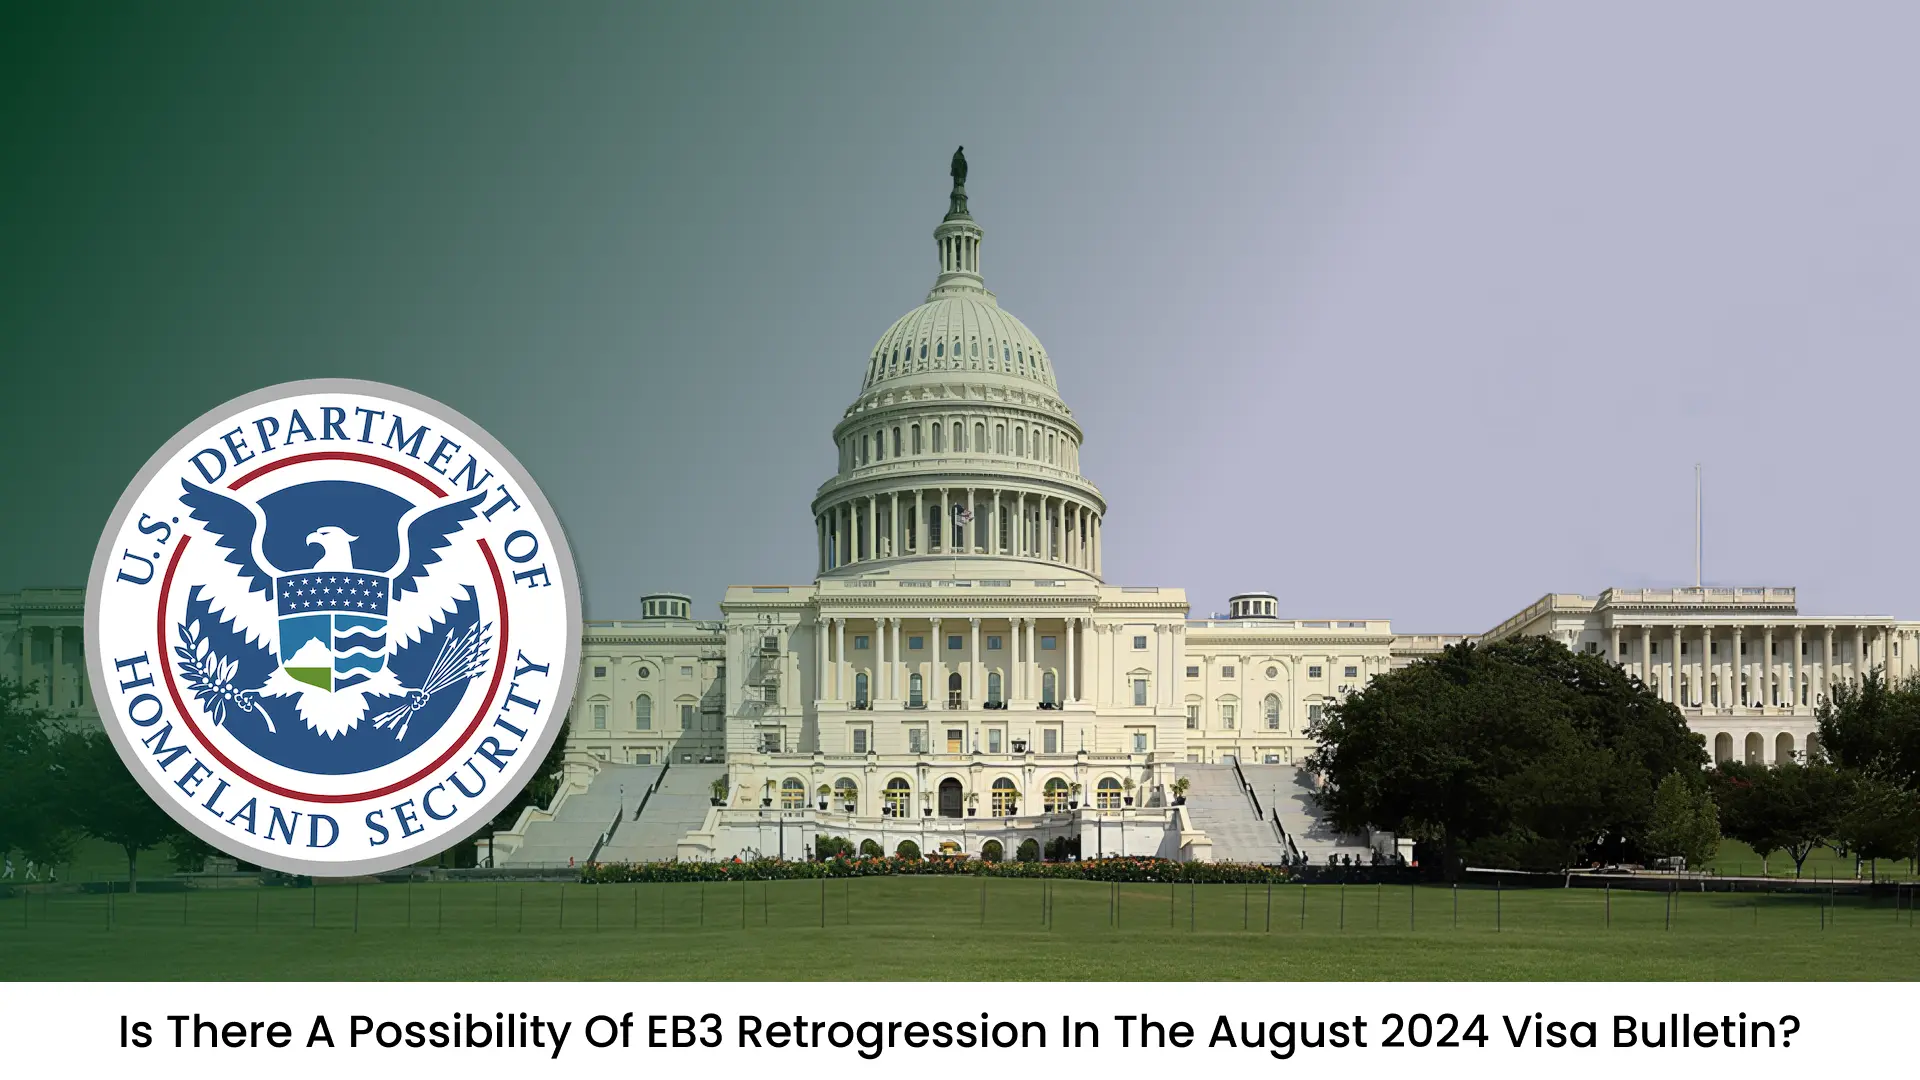 Is there a possibility of EB3 retrogression in the August 2024 visa bulletin?